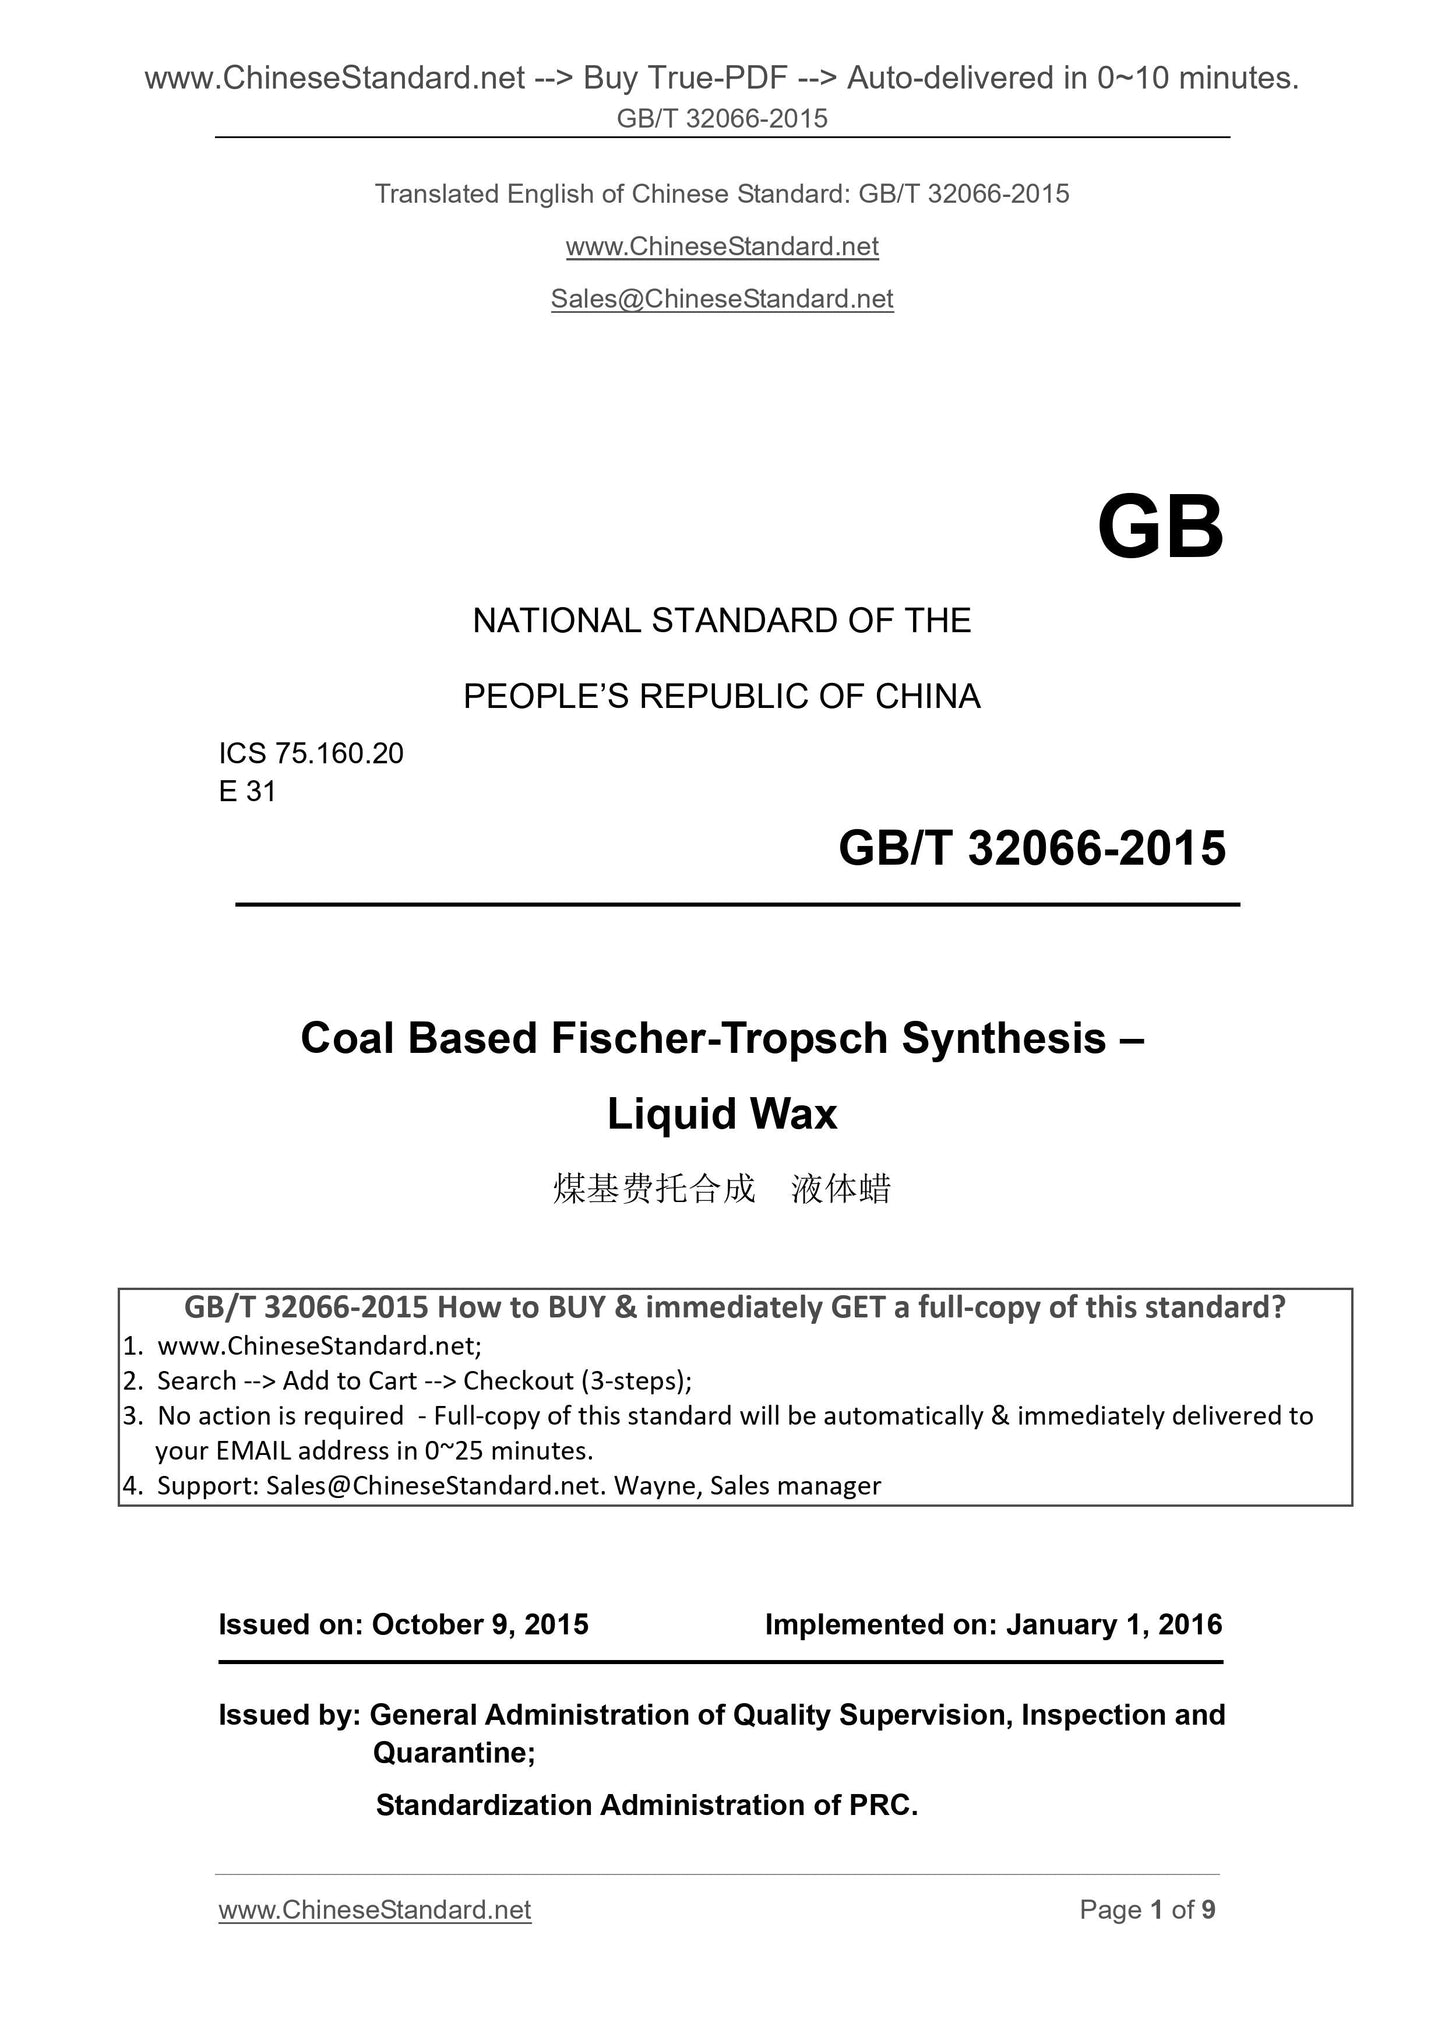 GB/T 32066-2015 Page 1